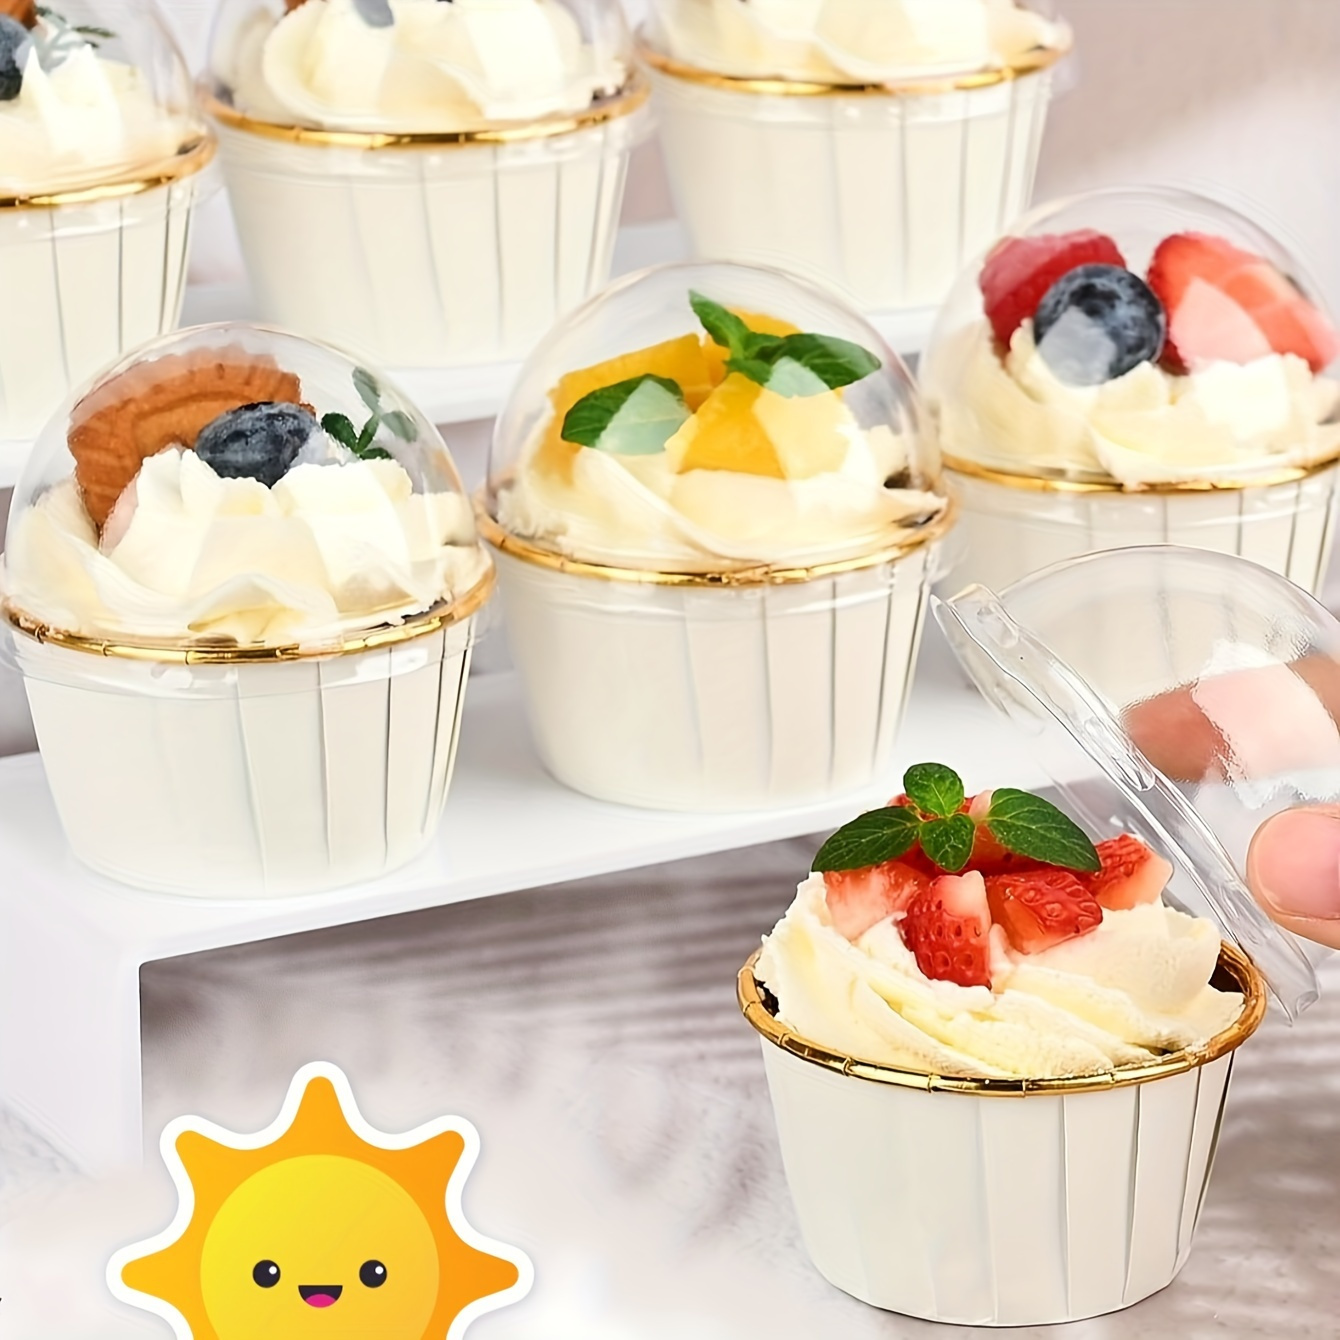 

25pcs Foil Cupcake Liners With Lids, 3.5oz Foil Baking Cups Mini Muffin Liners, Disposable Muffin Tins Muffin Cups, Sturdy Baking Tins Cupcake Cups For Individual Bakery